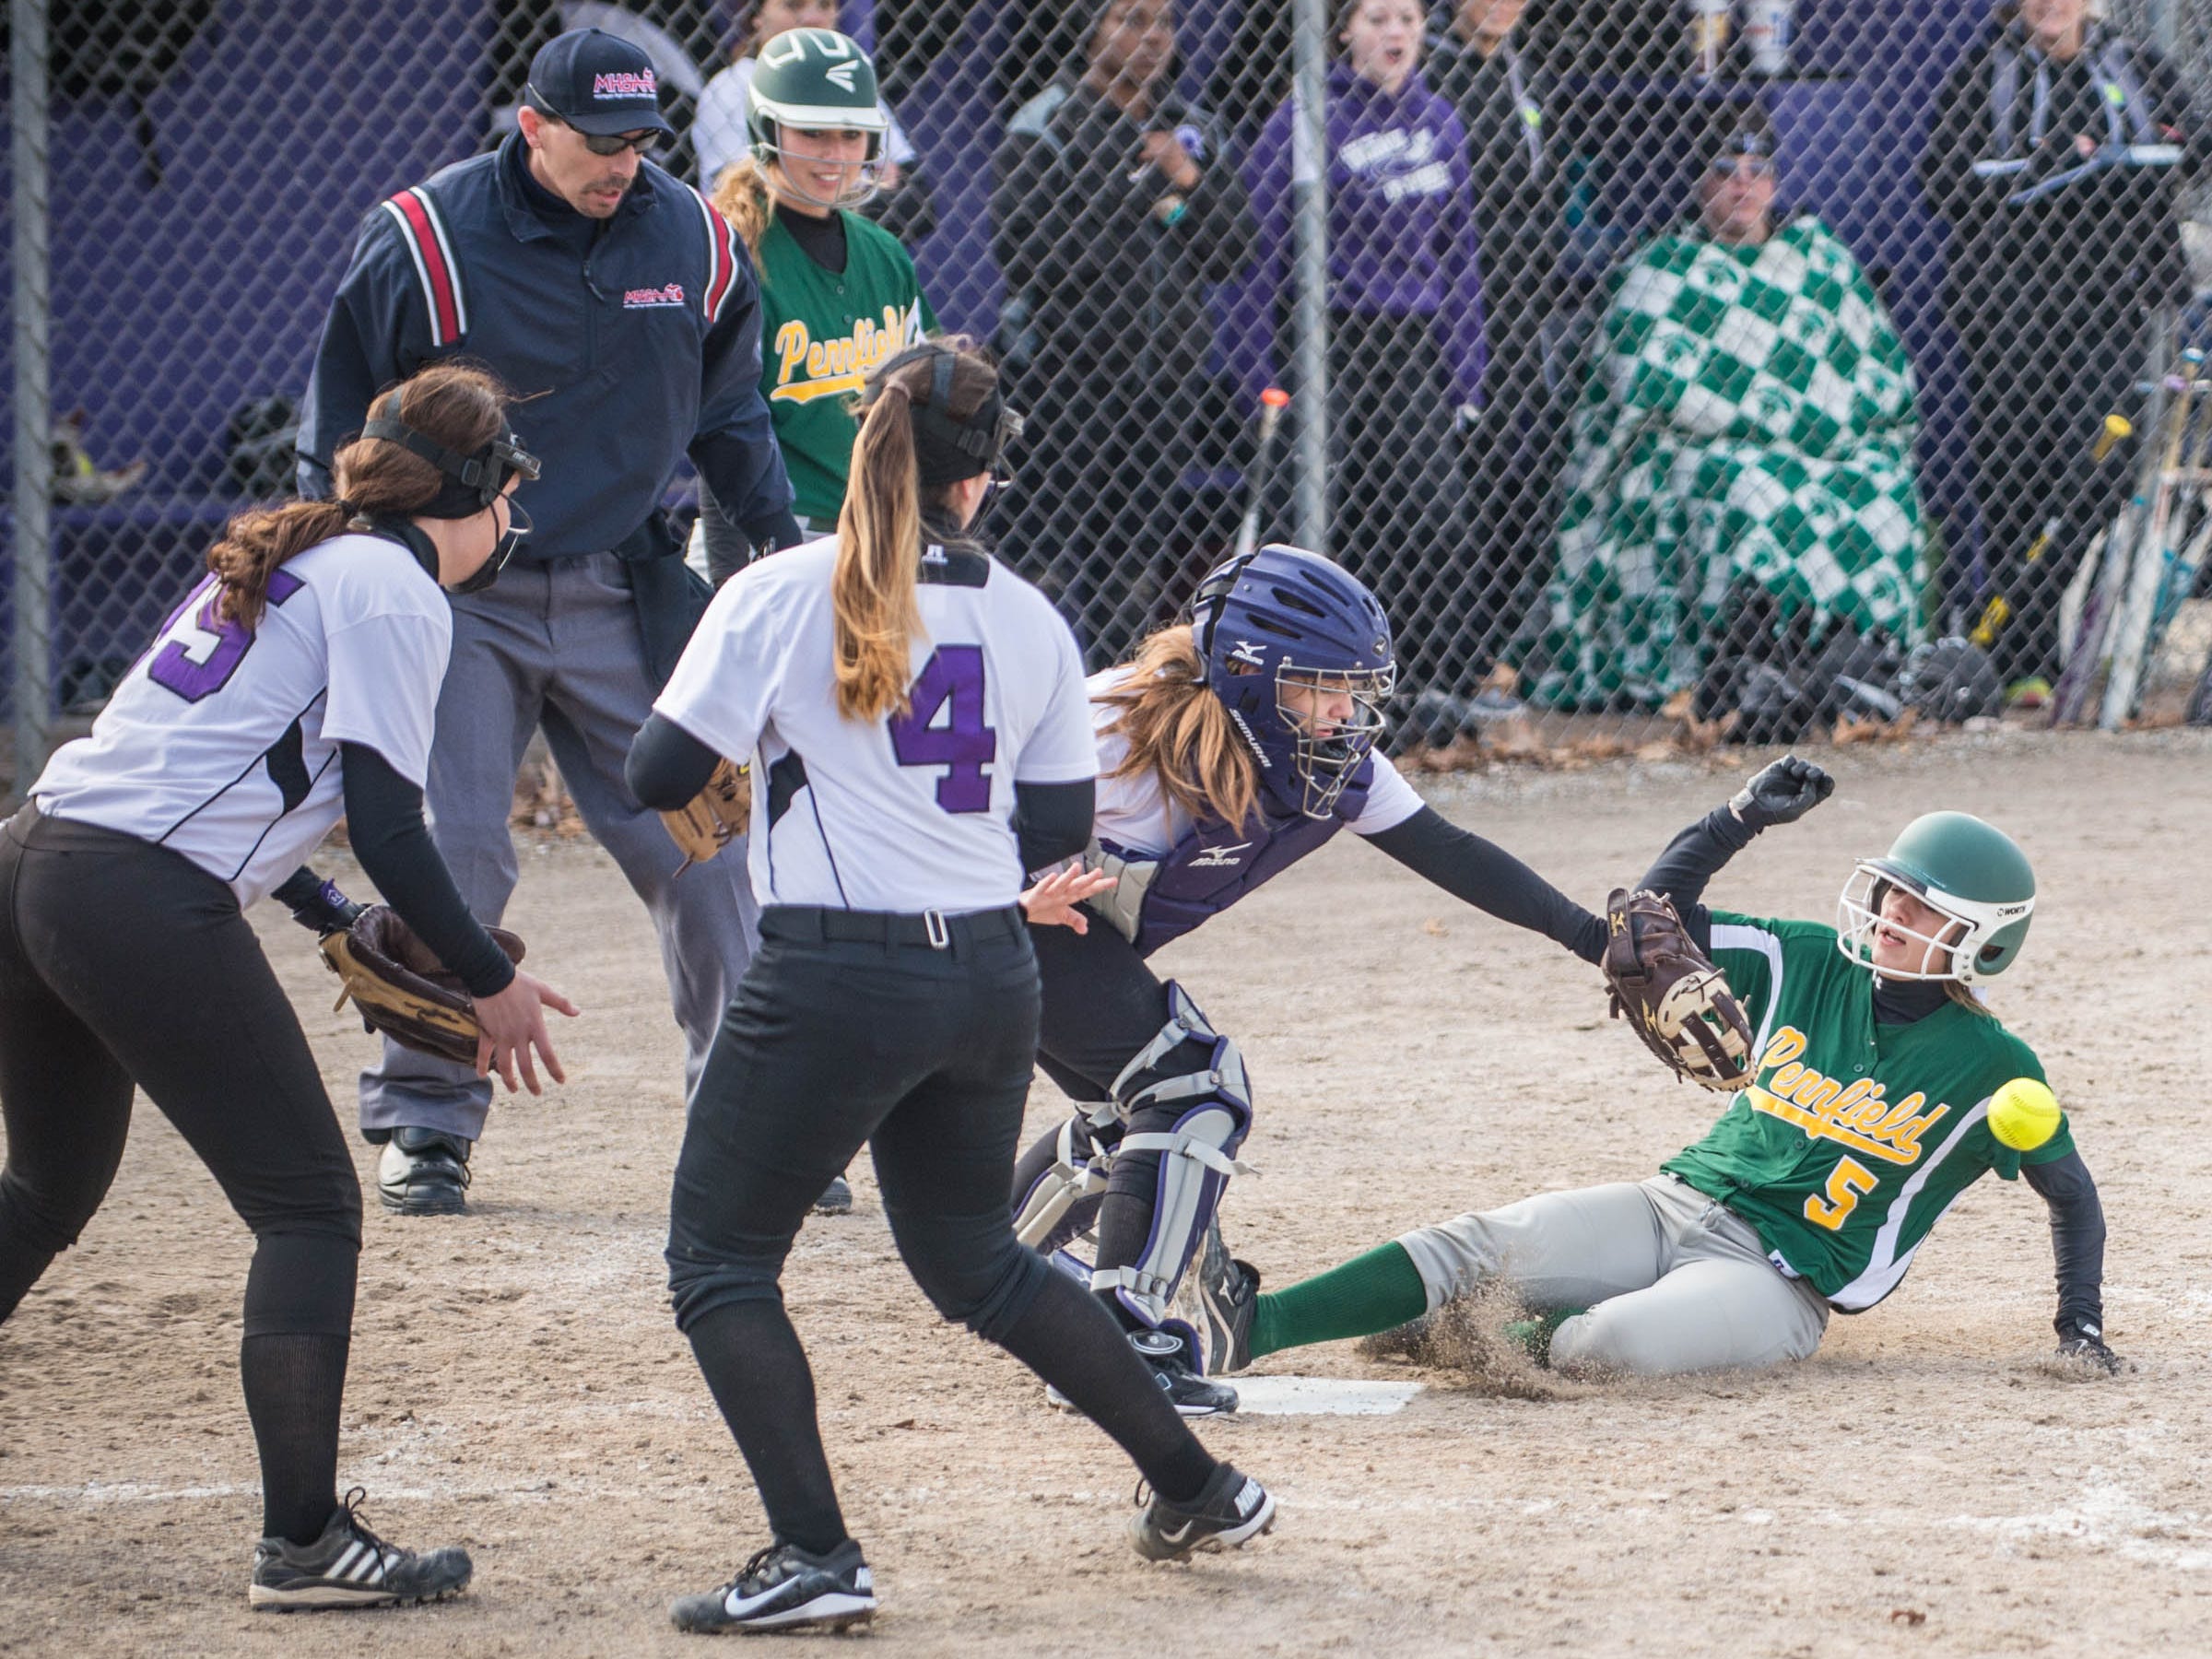 Pennfield's Jessica Roan slides into home plate during a recent game against Lakeview.